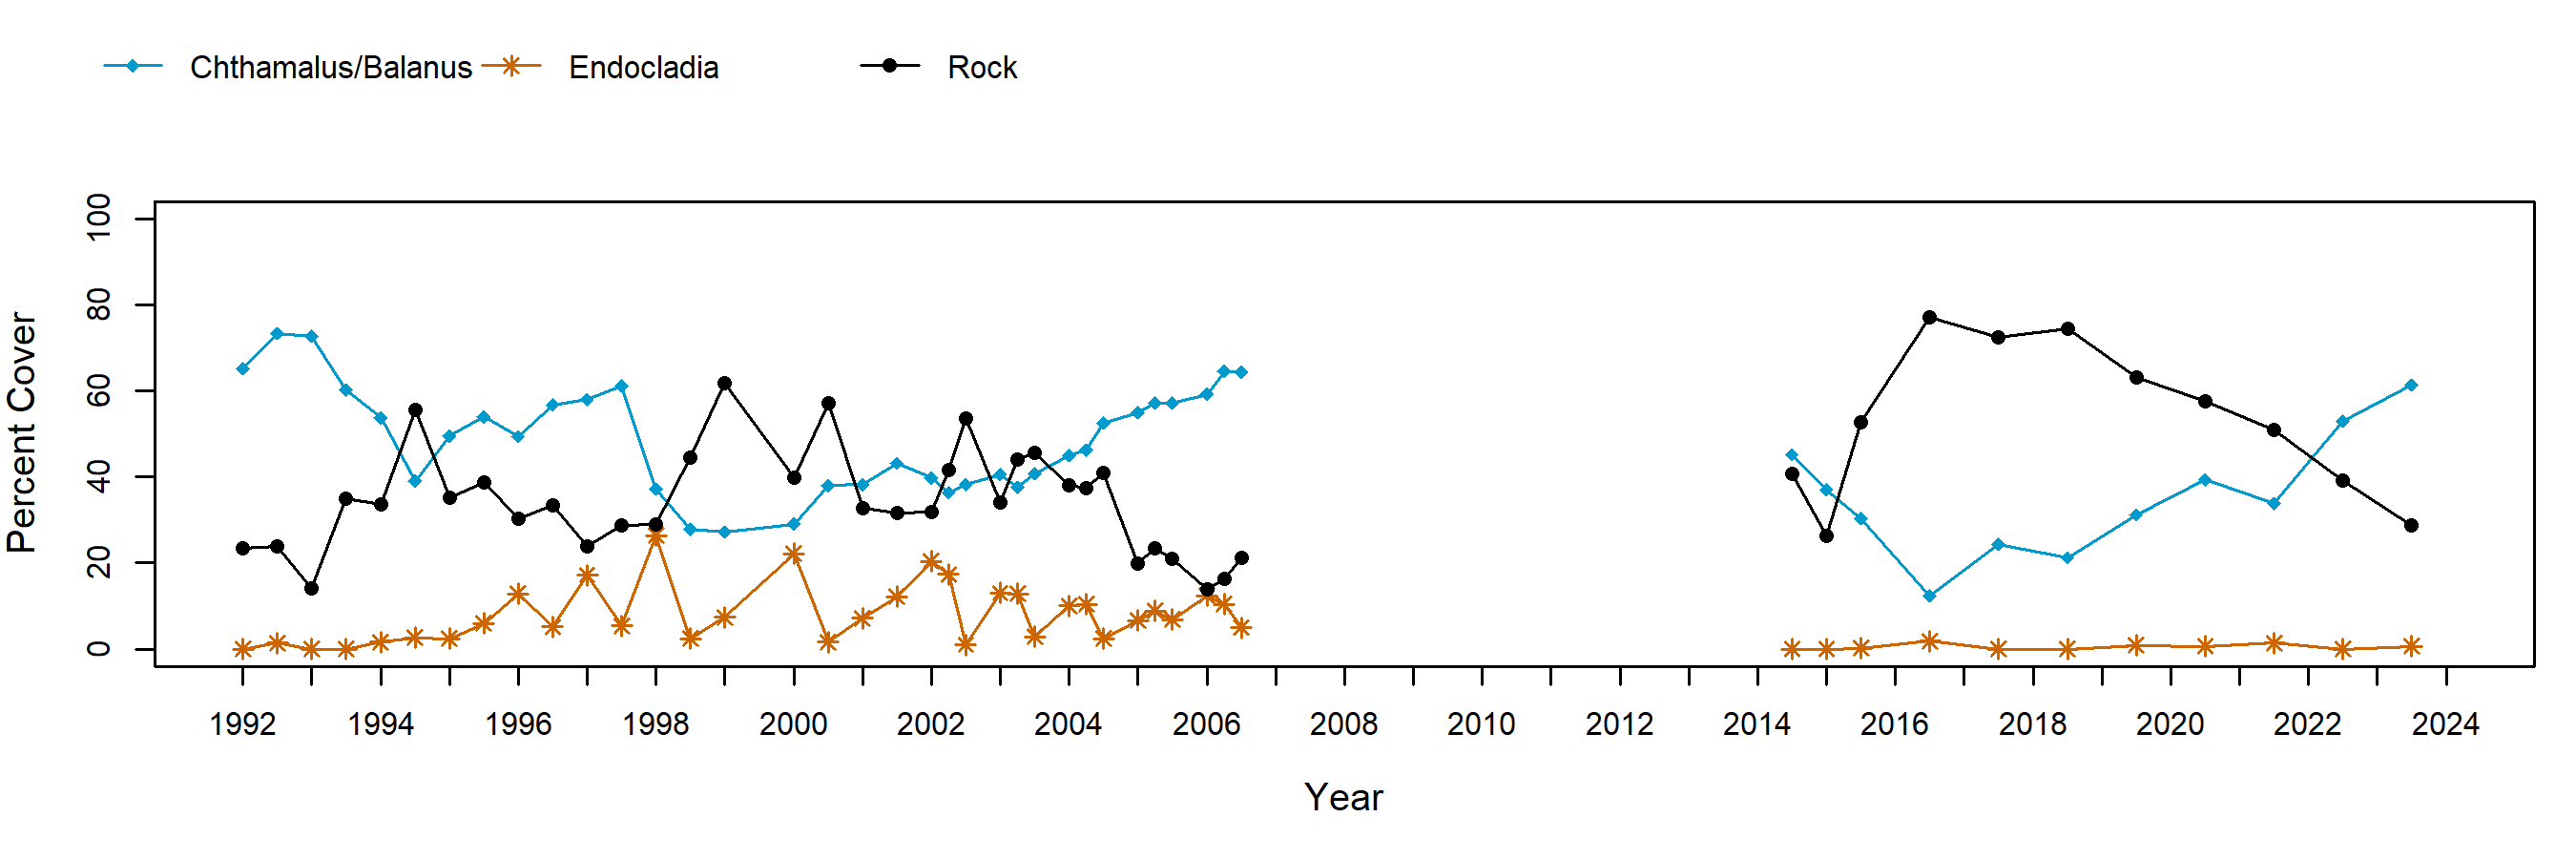 Government Point barnacle trend plot